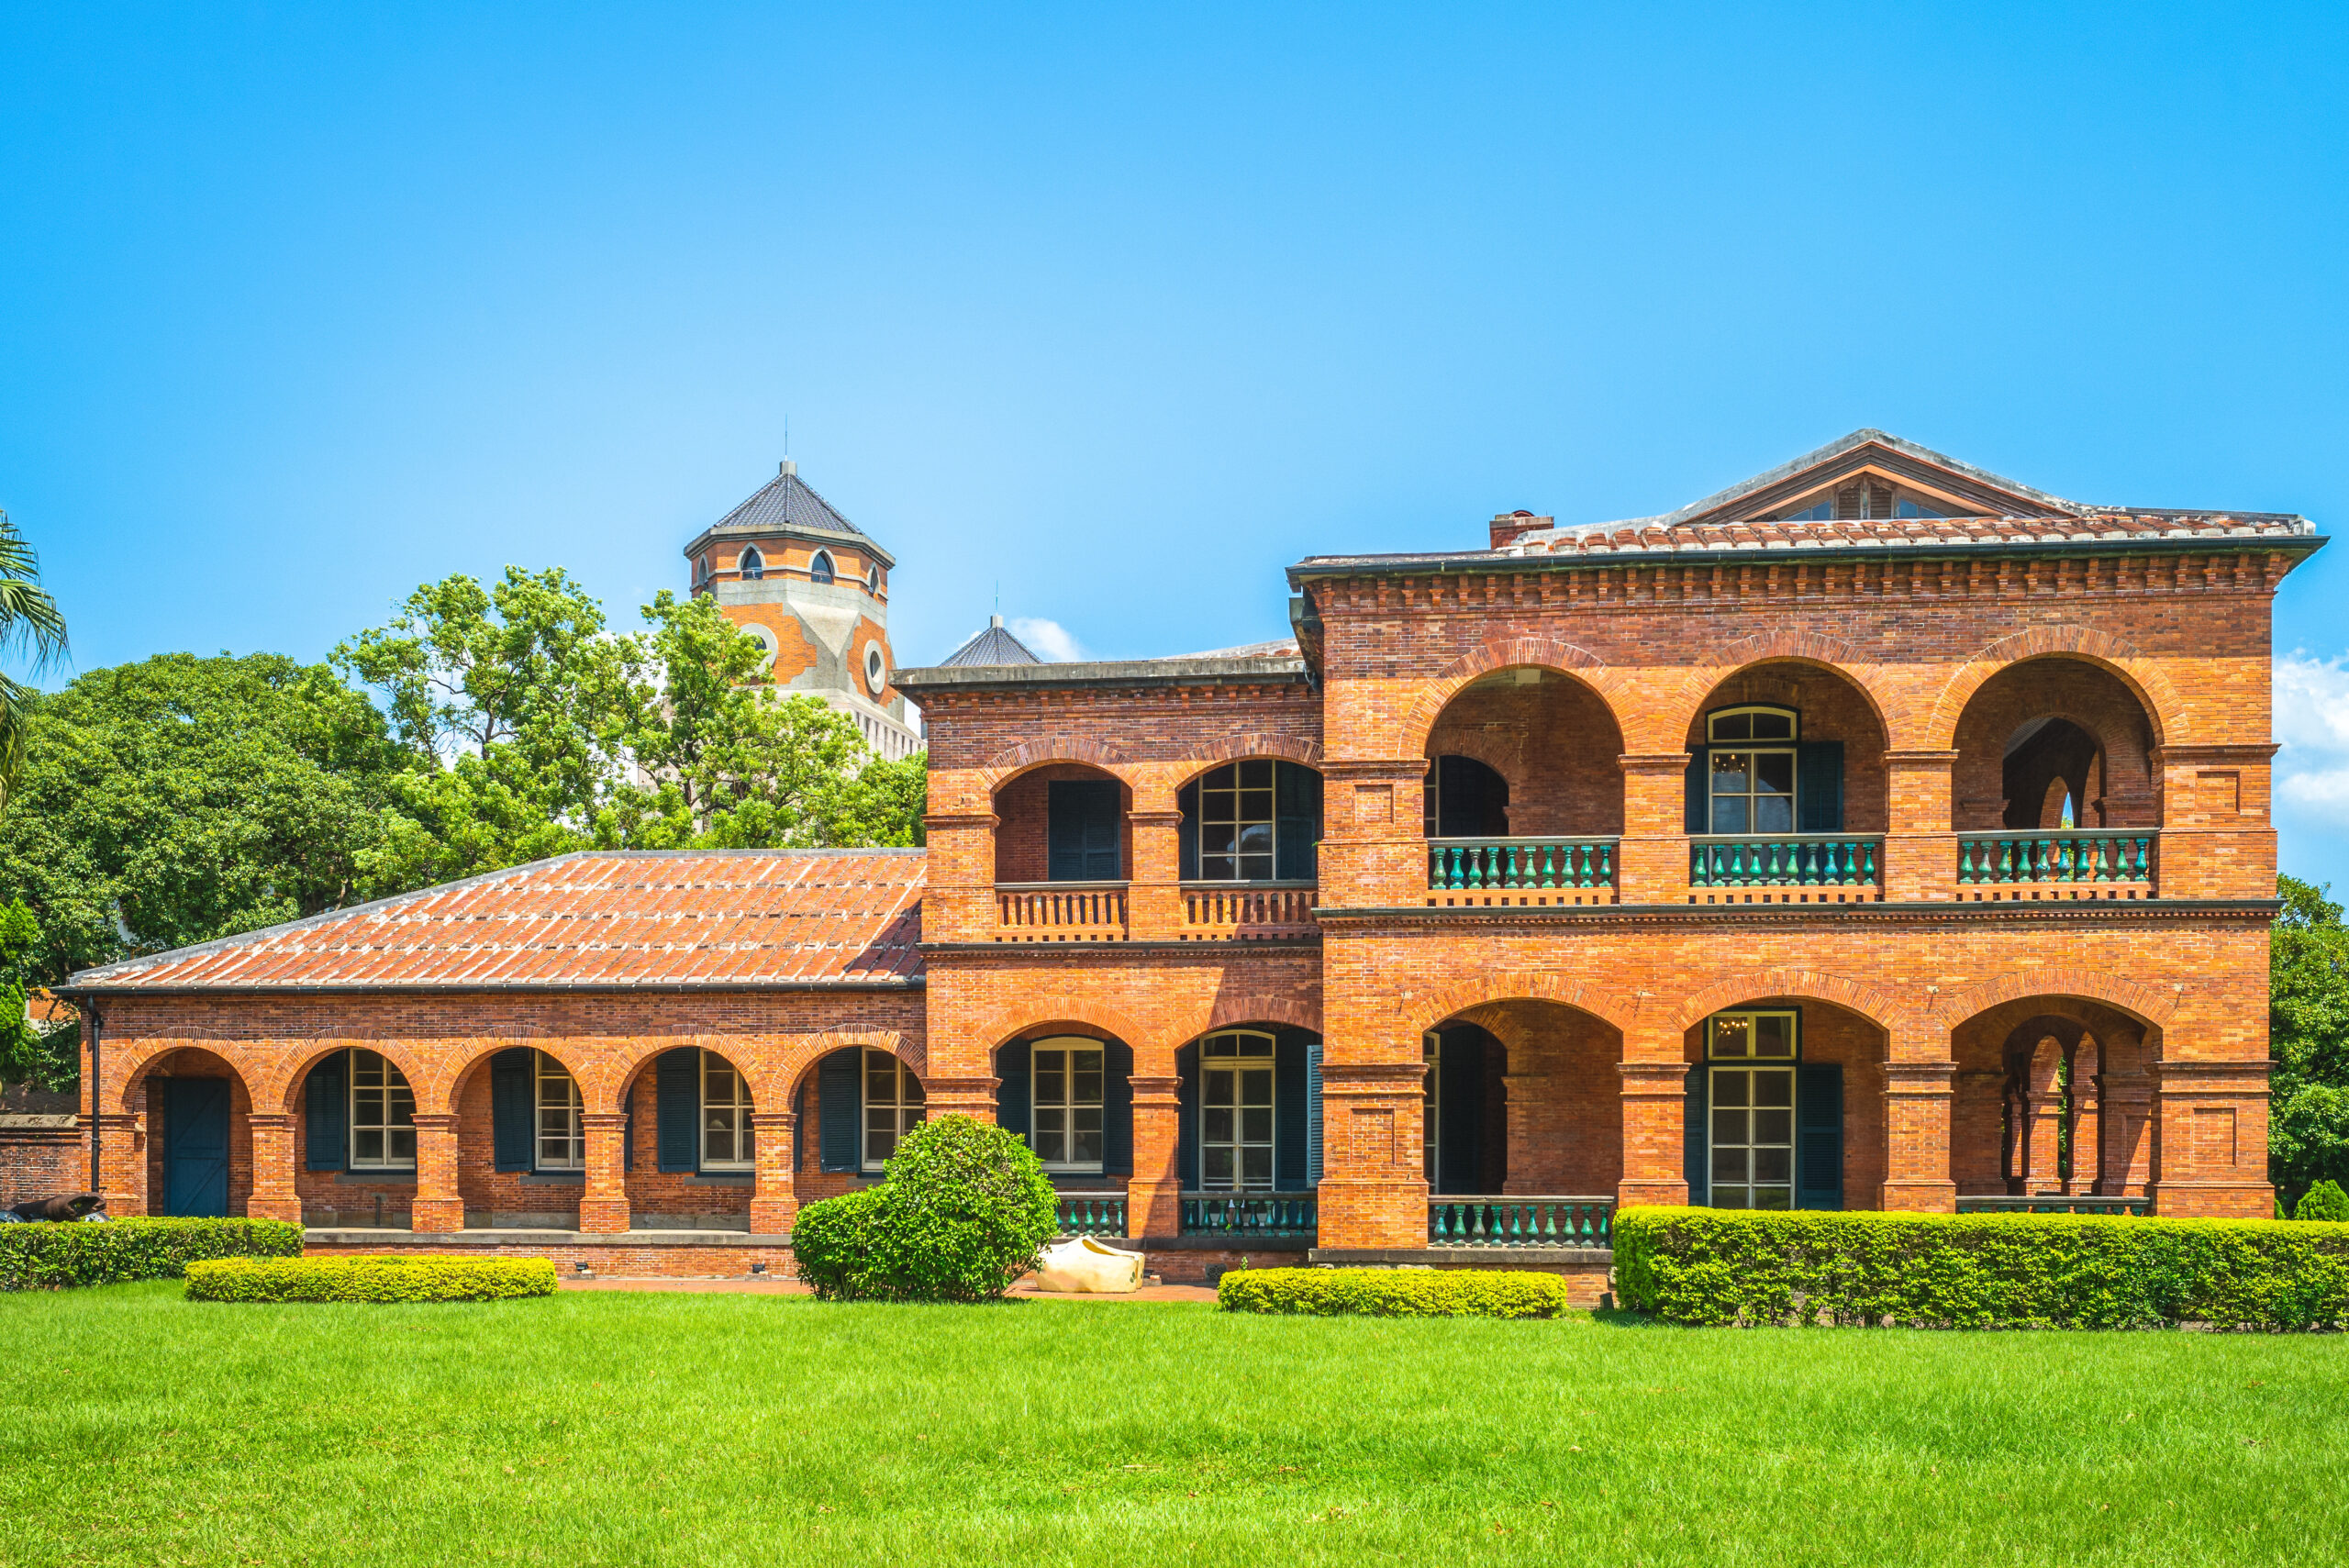 The British-built consular residence in Tamsui